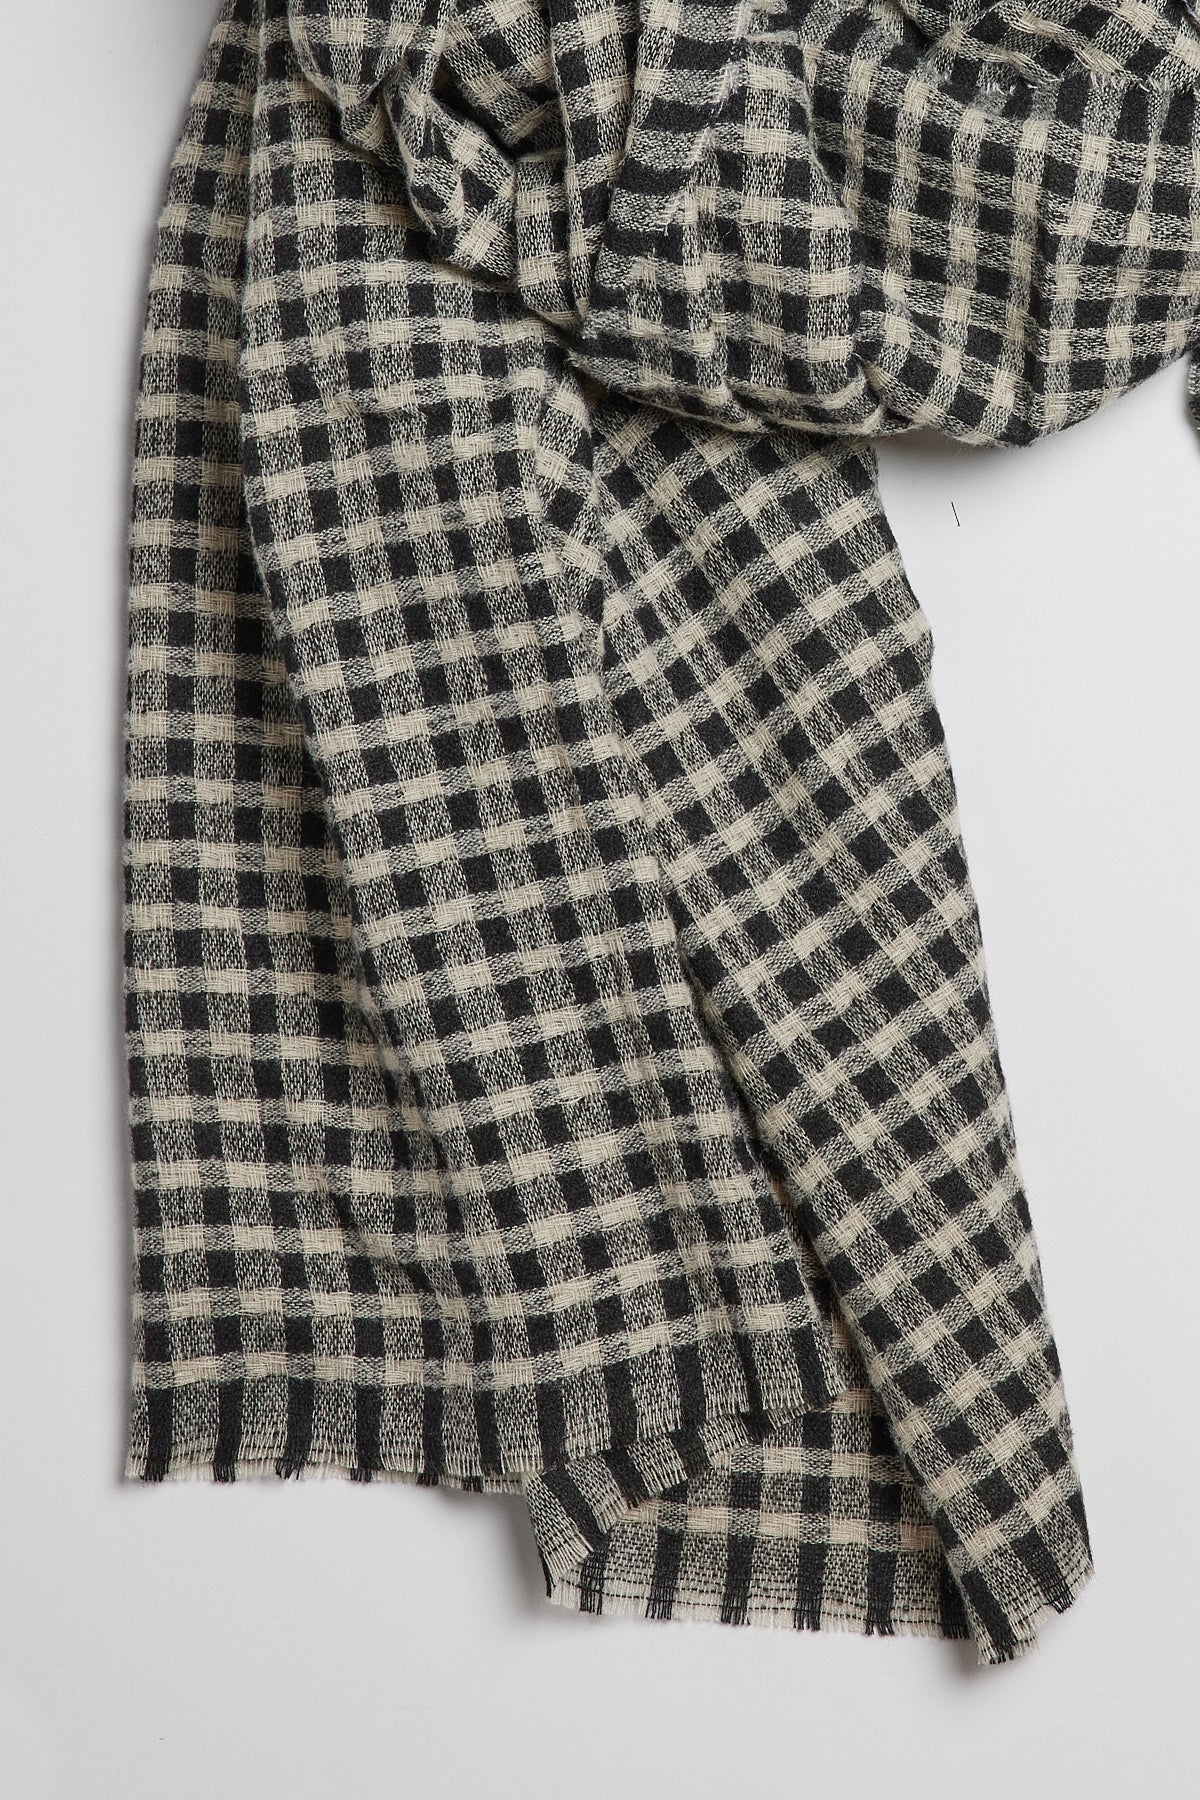   Bicolor Check Scarf in black and ivory fabric detail 